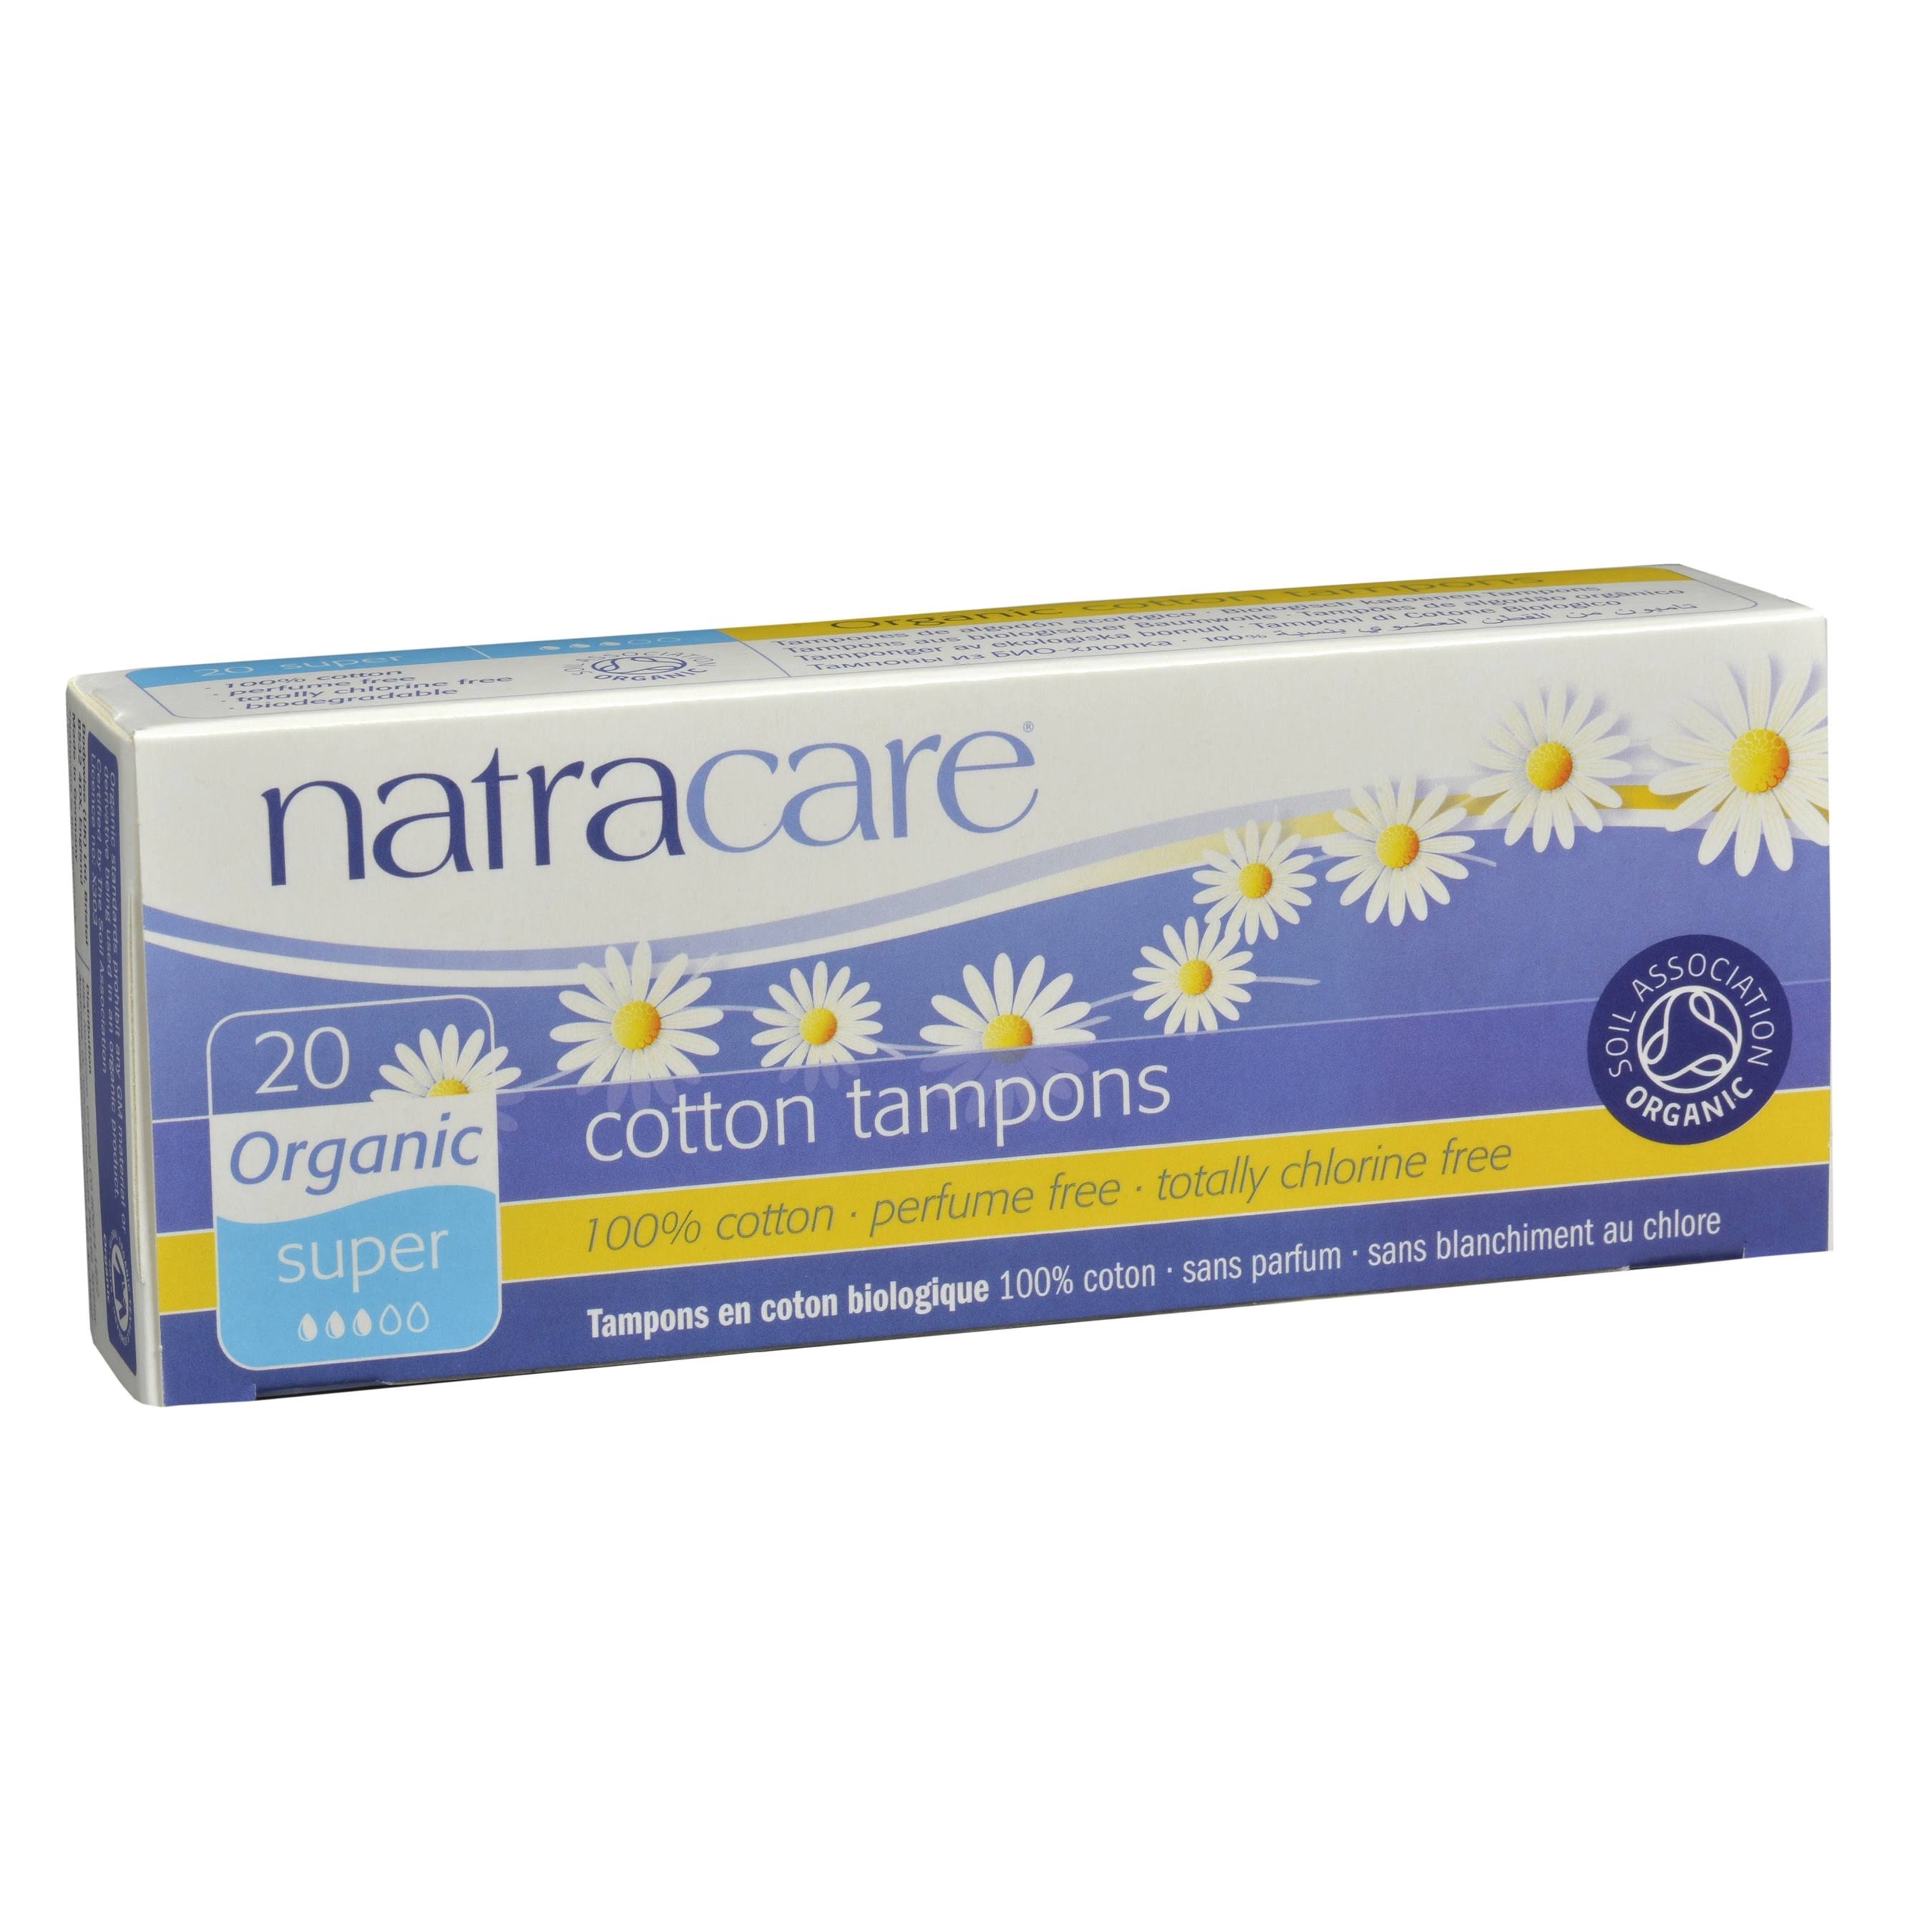 Natracare Tampons - Organic, All Cotton Tampons, Super, 20 Pack